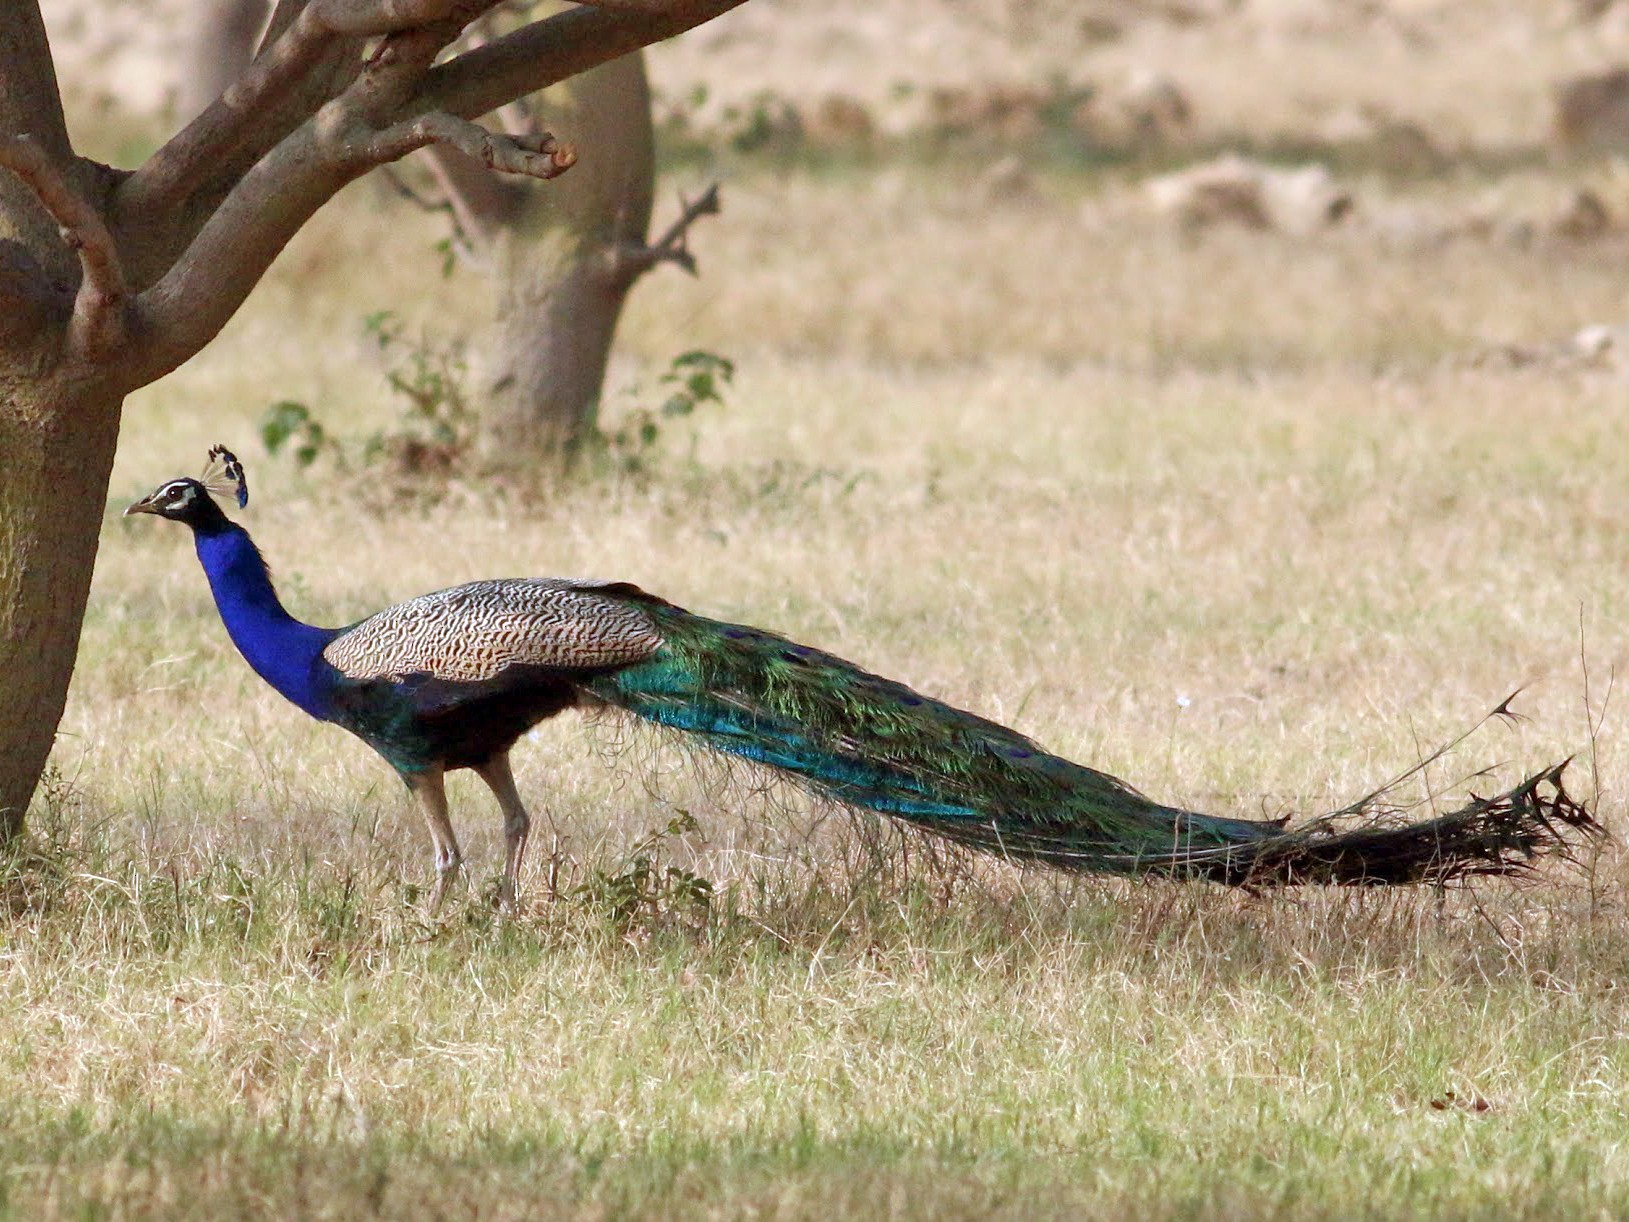 Indian peacock: World Tallest Peacock